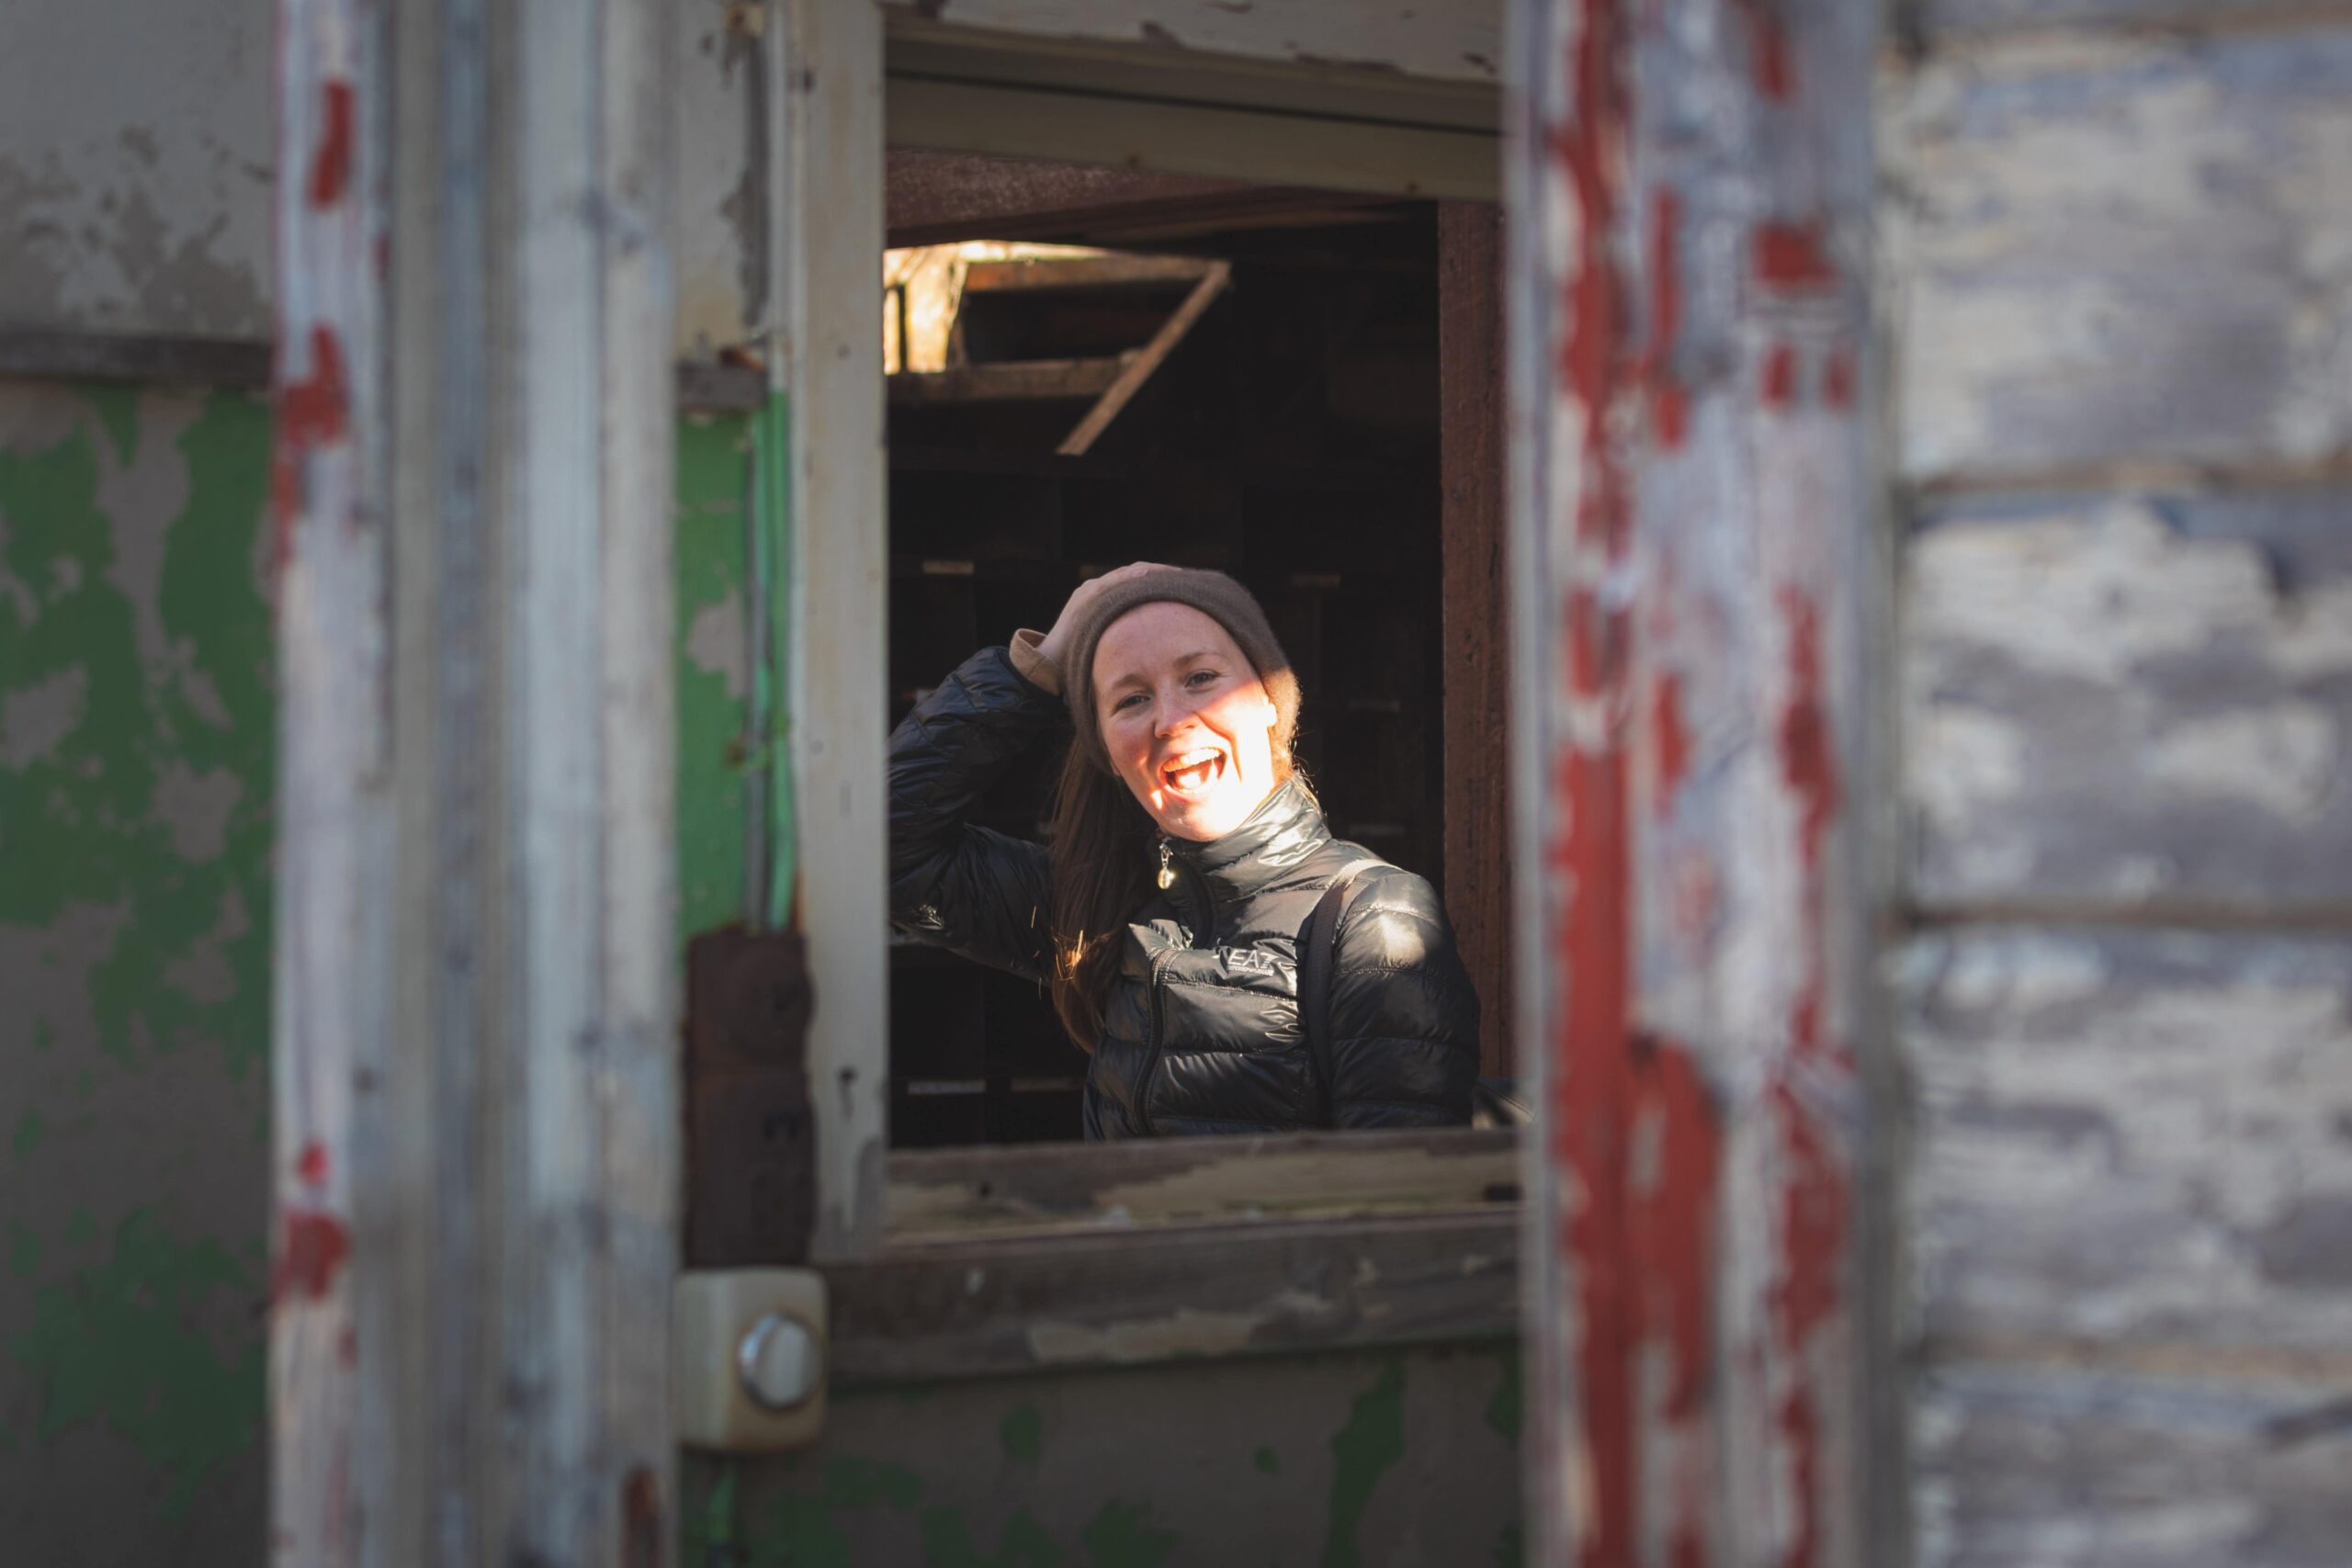 millenial-woman-smiling-in-abandoned-house